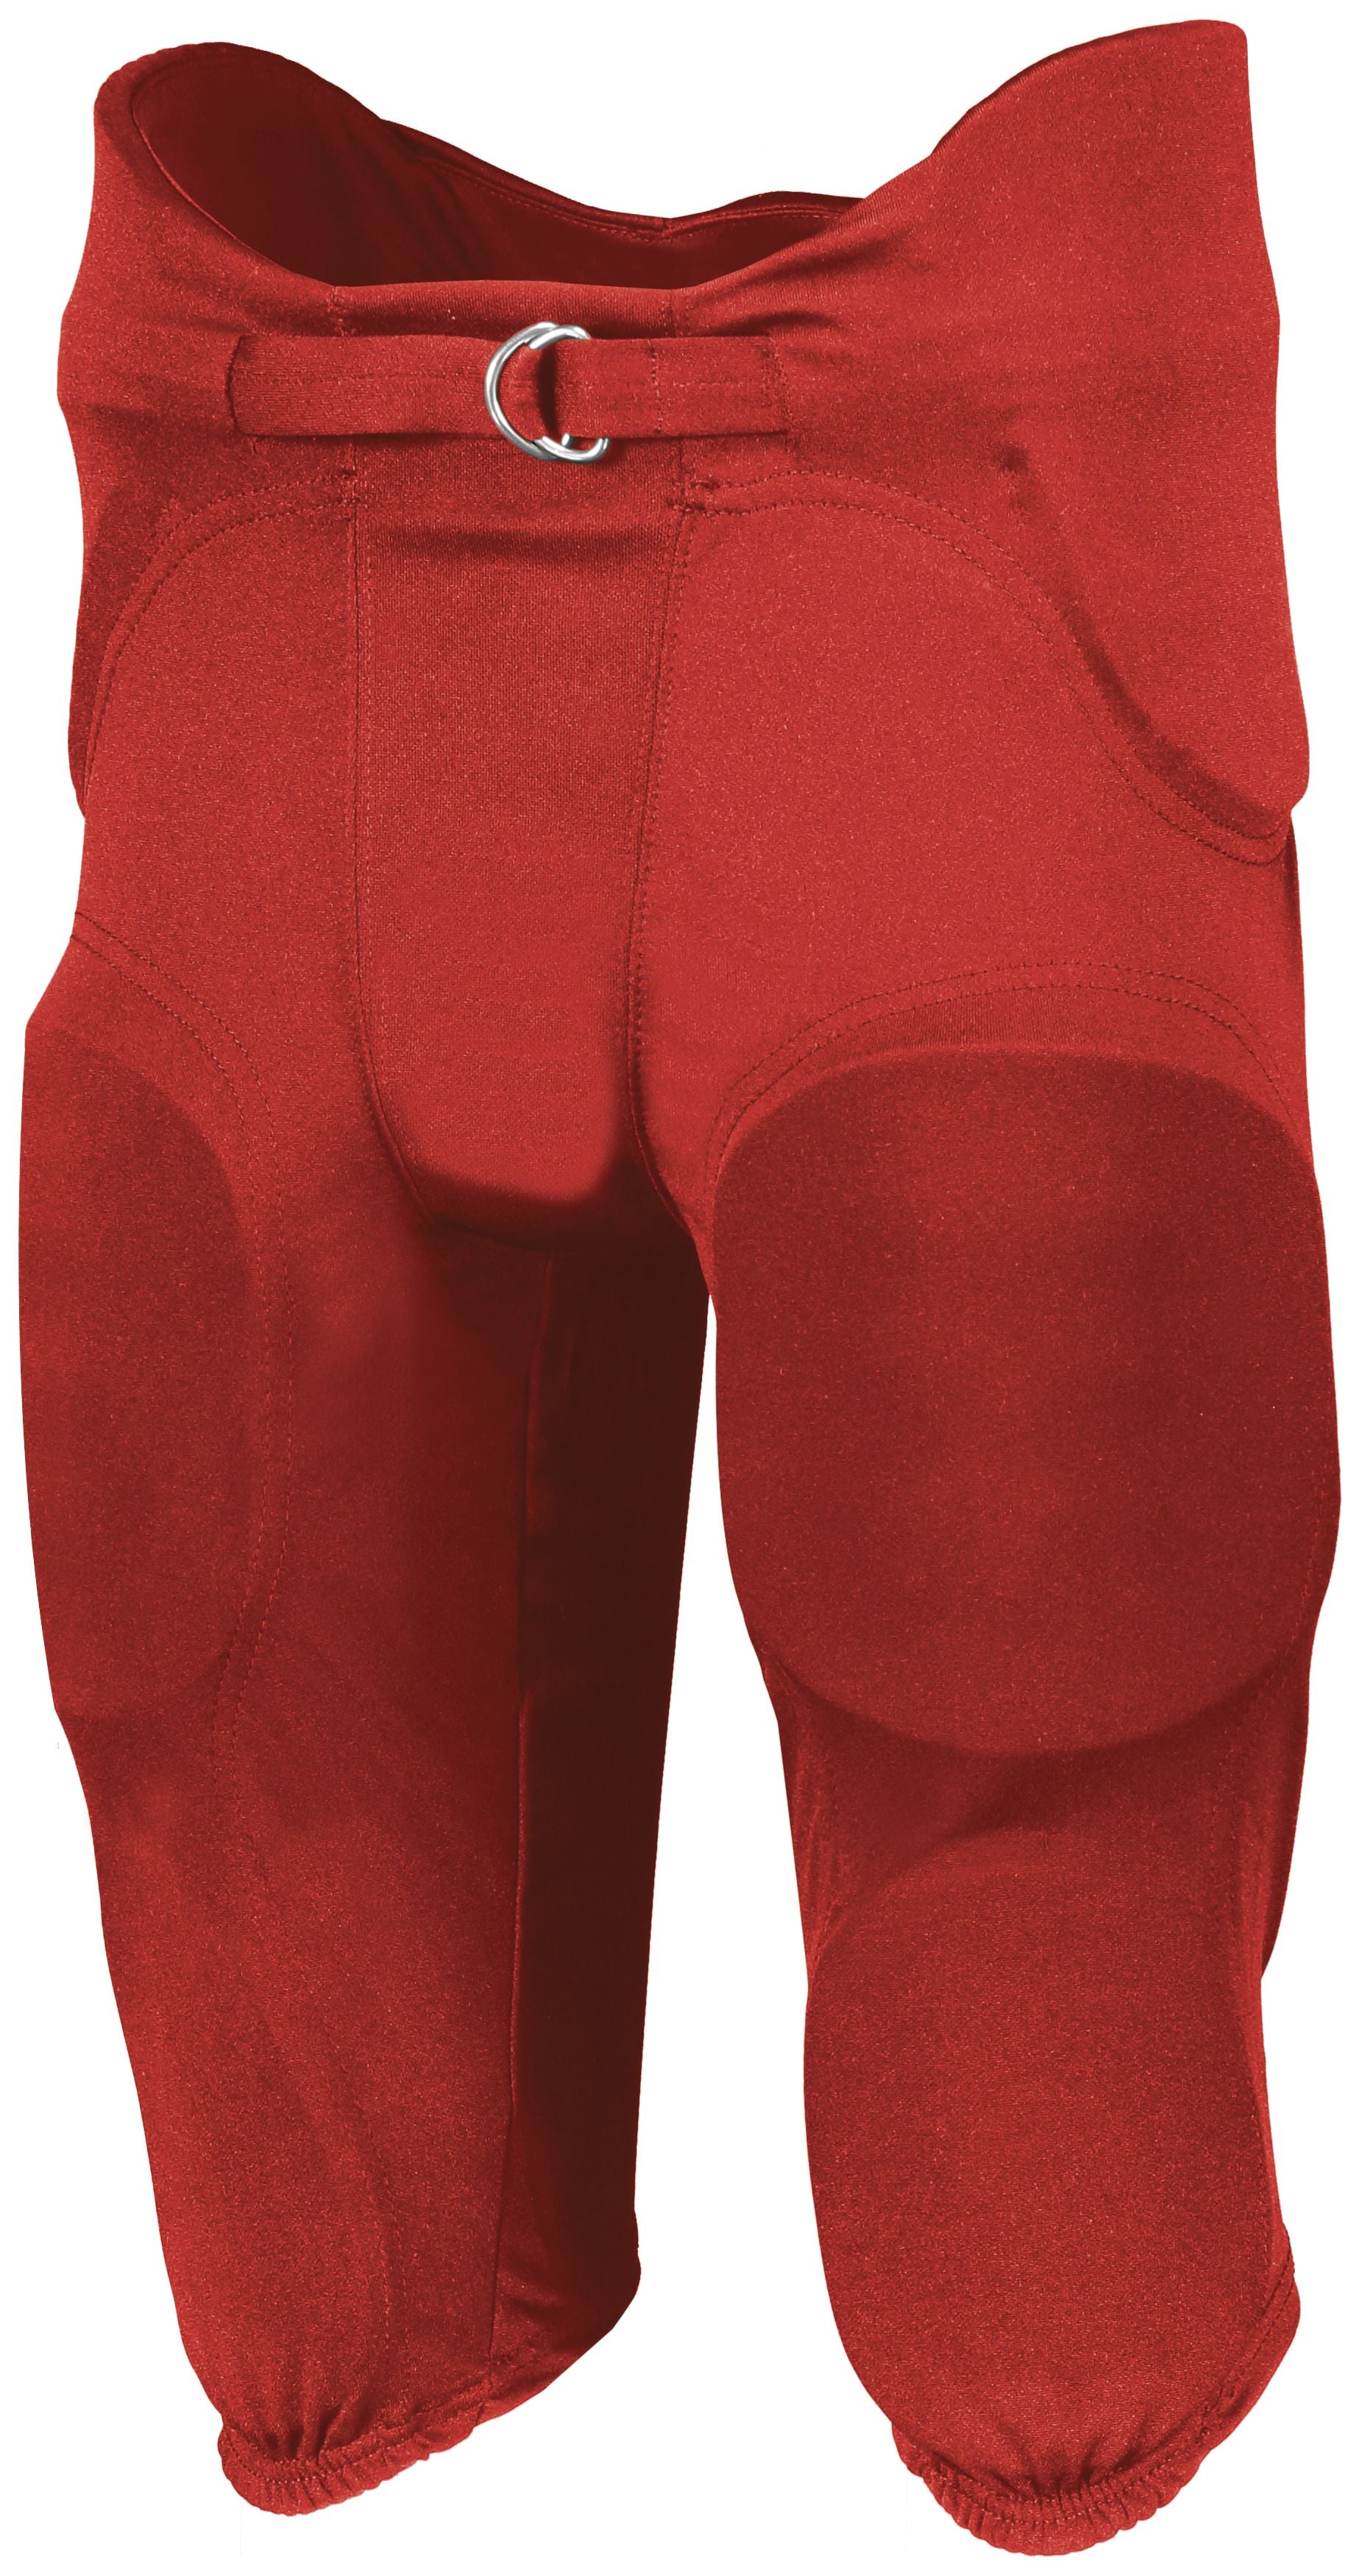 Russell Athletic Youth Integrated 7-Piece Pad Pant in True Red  -Part of the Youth, Youth-Pants, Pants, Football, Russell-Athletic-Products, All-Sports, All-Sports-1 product lines at KanaleyCreations.com